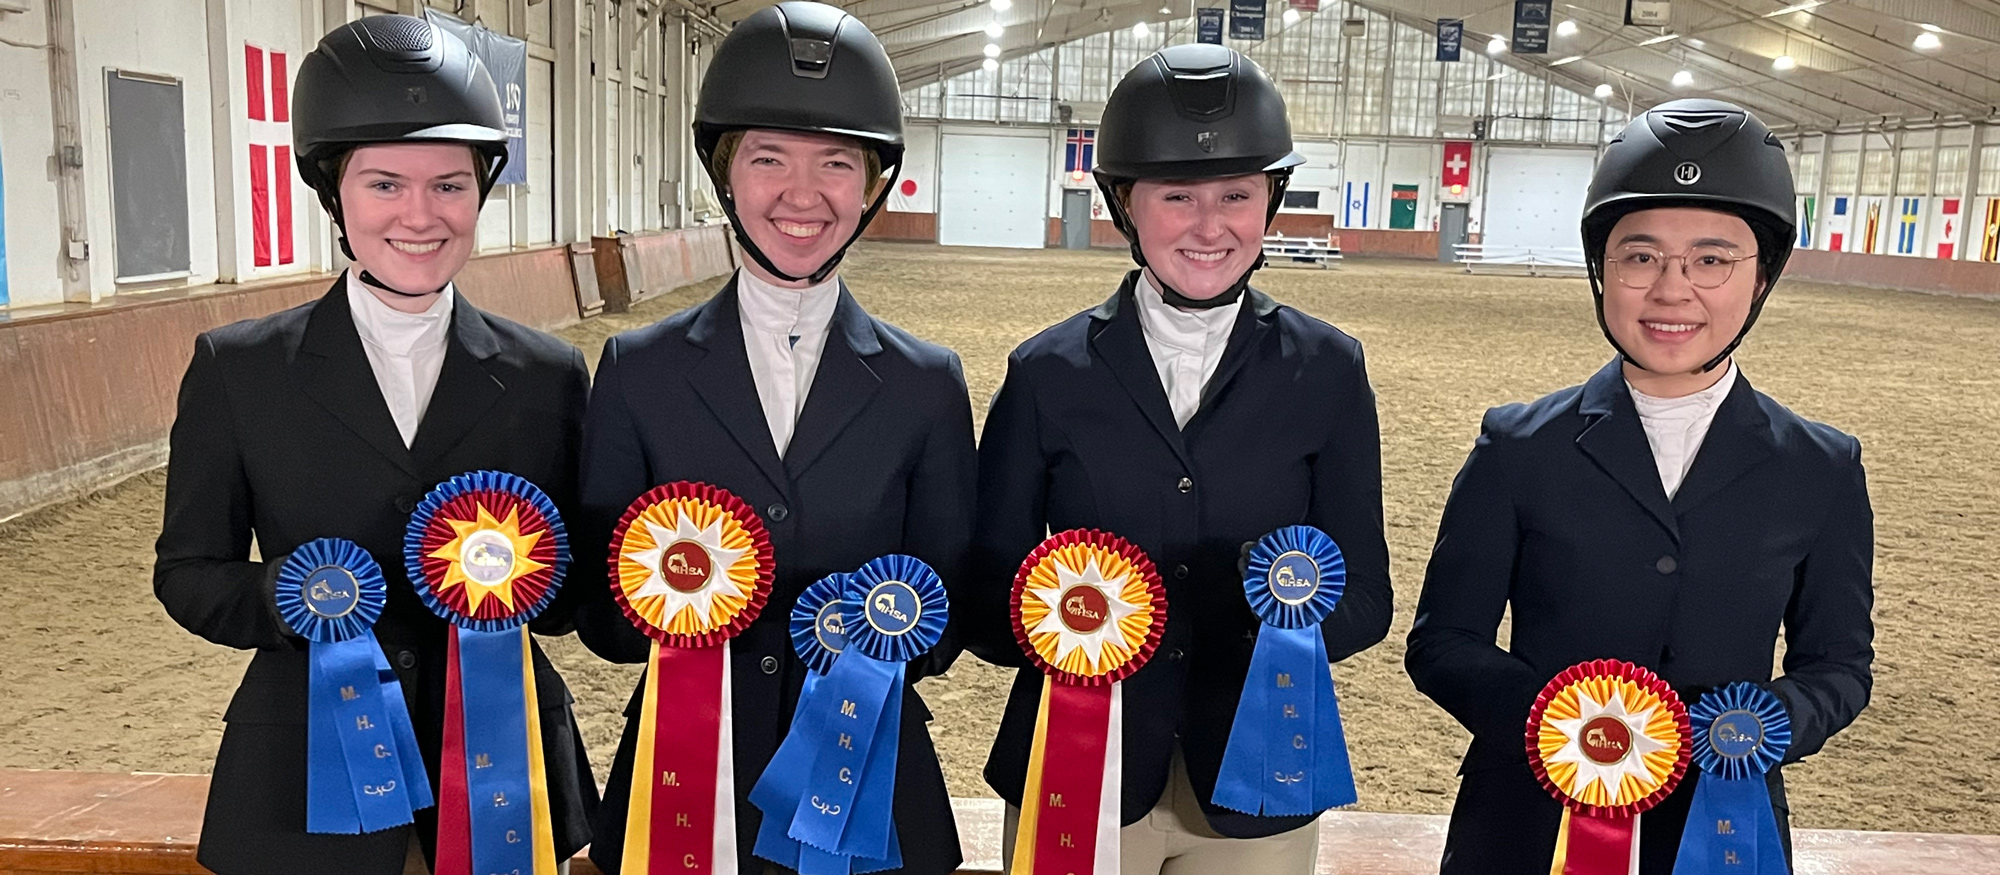 From left to right, Megan Bliamptis claimed High Point Introductory Rider honors, Emmie Mirarchi won Reserve High Point Rider honors, Mara Downie was Reserve Novice Rider, and senior Lingdang Zhang won the Reserve High Point Introductory award at the Mount Holyoke Show on March 2, 2024.